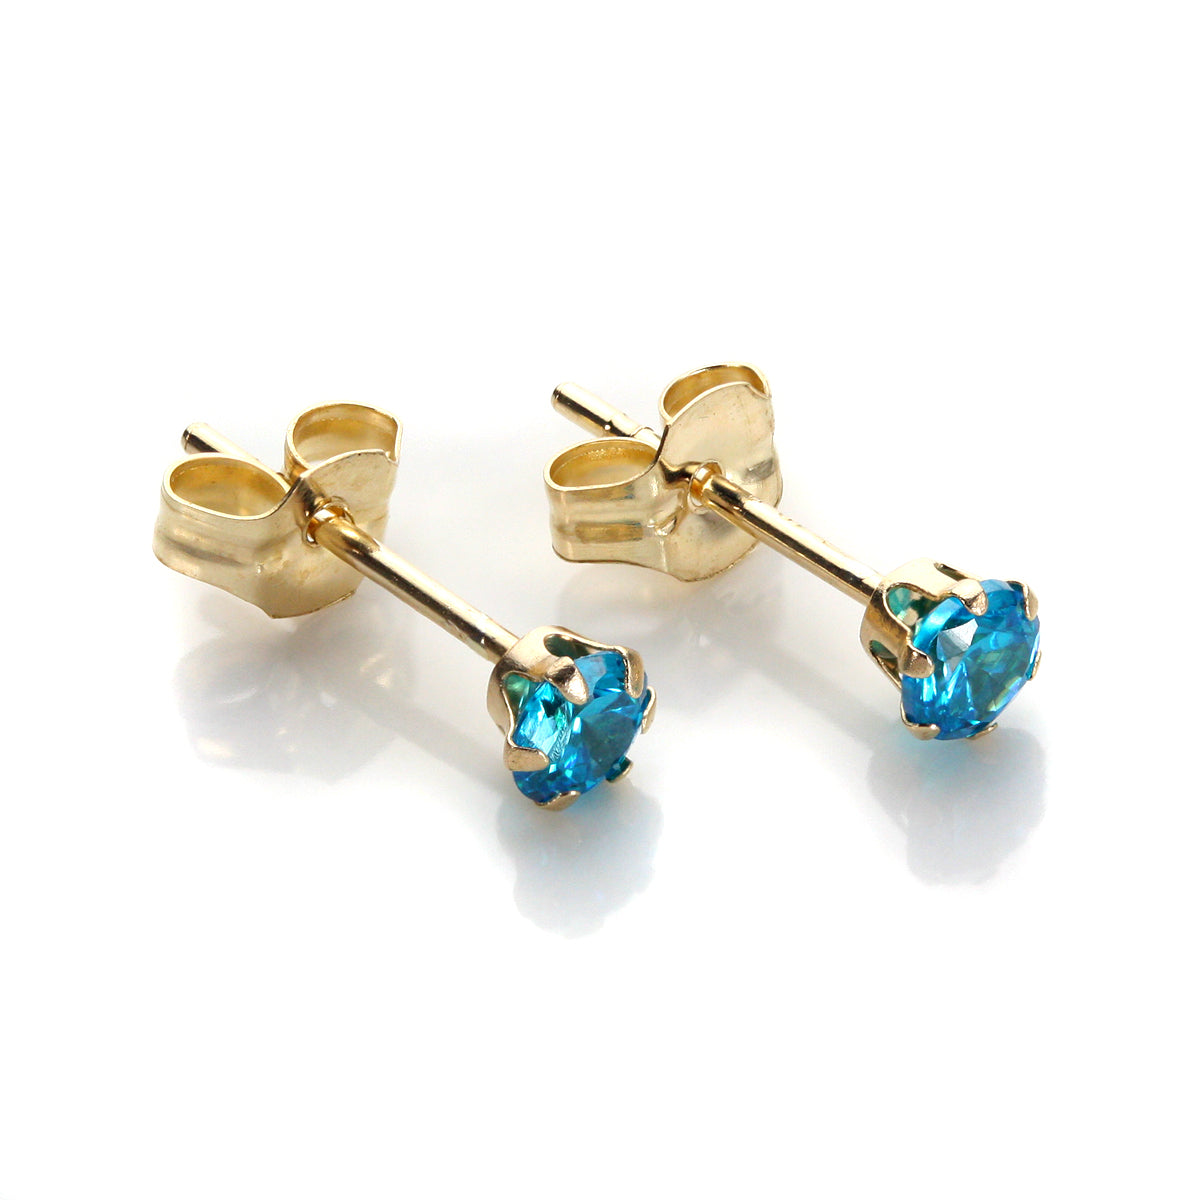 9ct Yellow Gold Crystal 3mm Round Stud Earrings